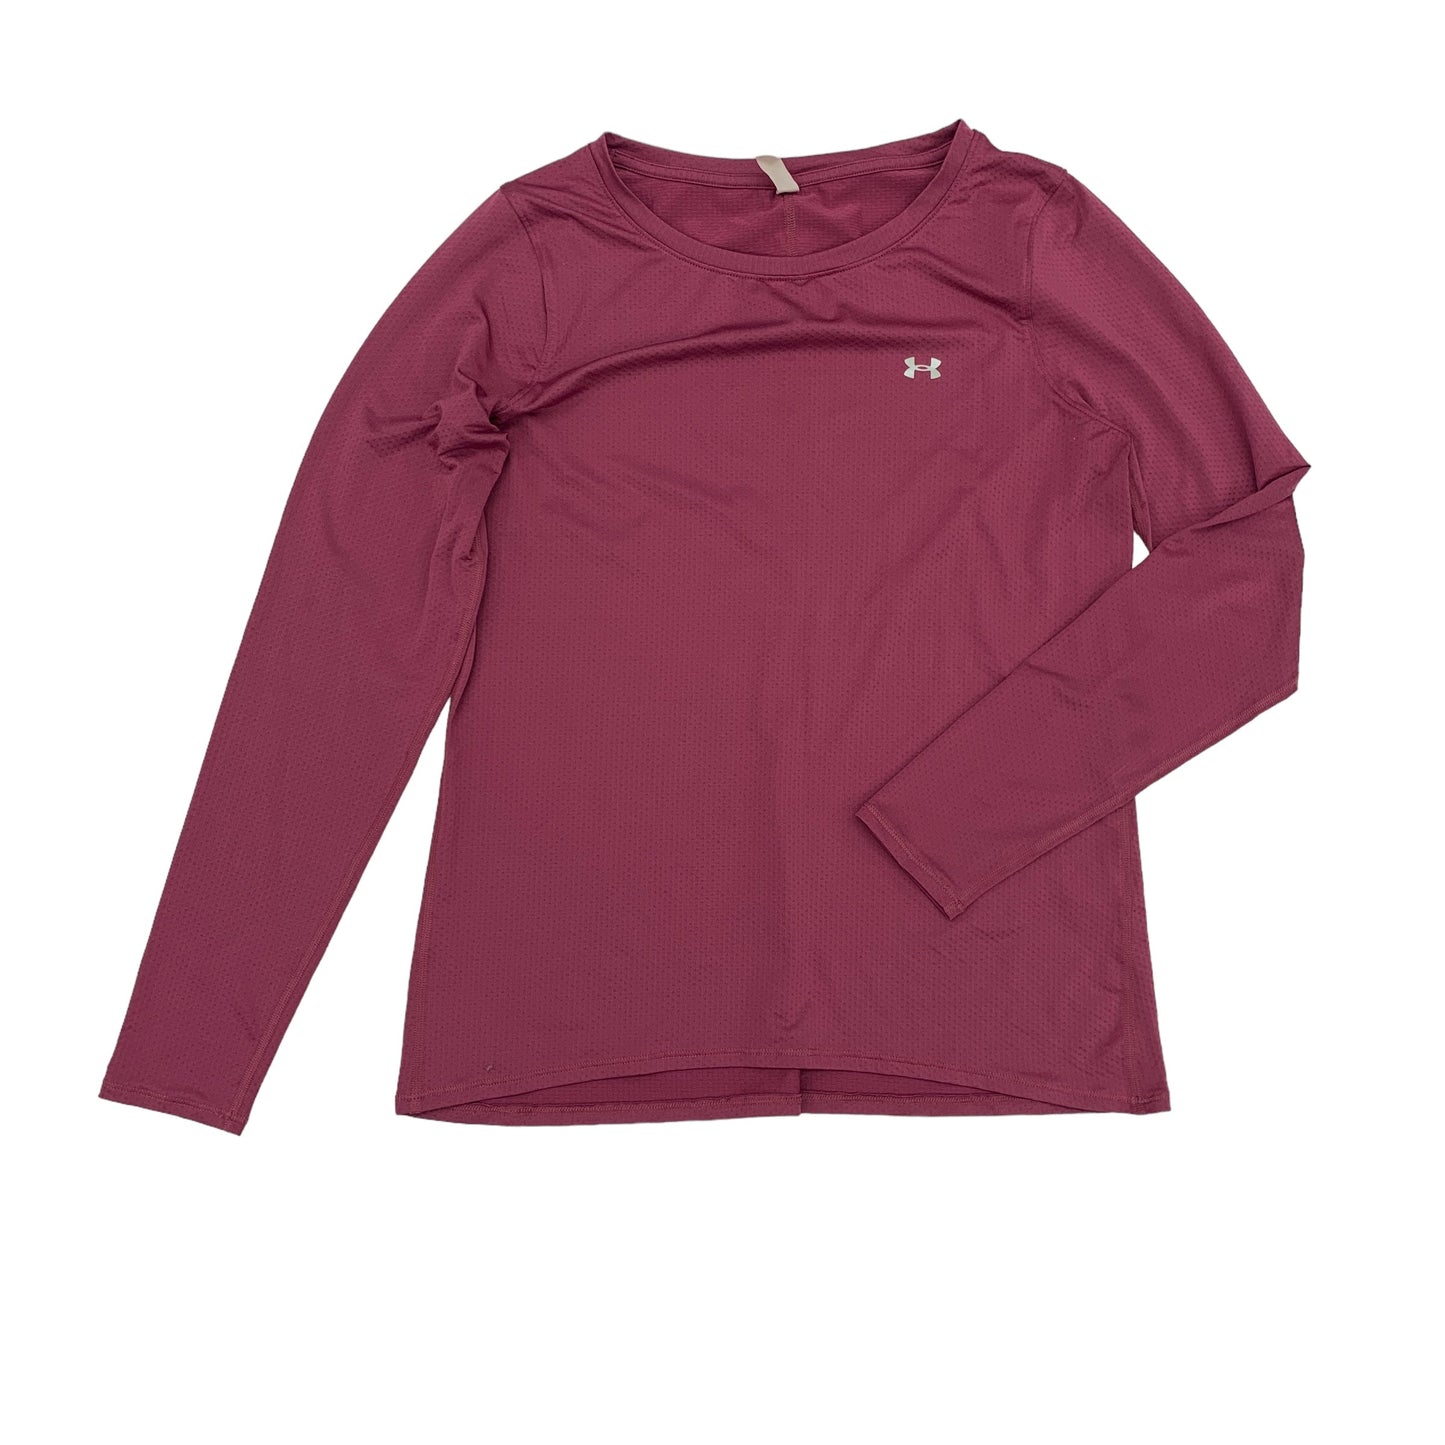 Athletic Top Long Sleeve Crewneck By Under Armour  Size: L